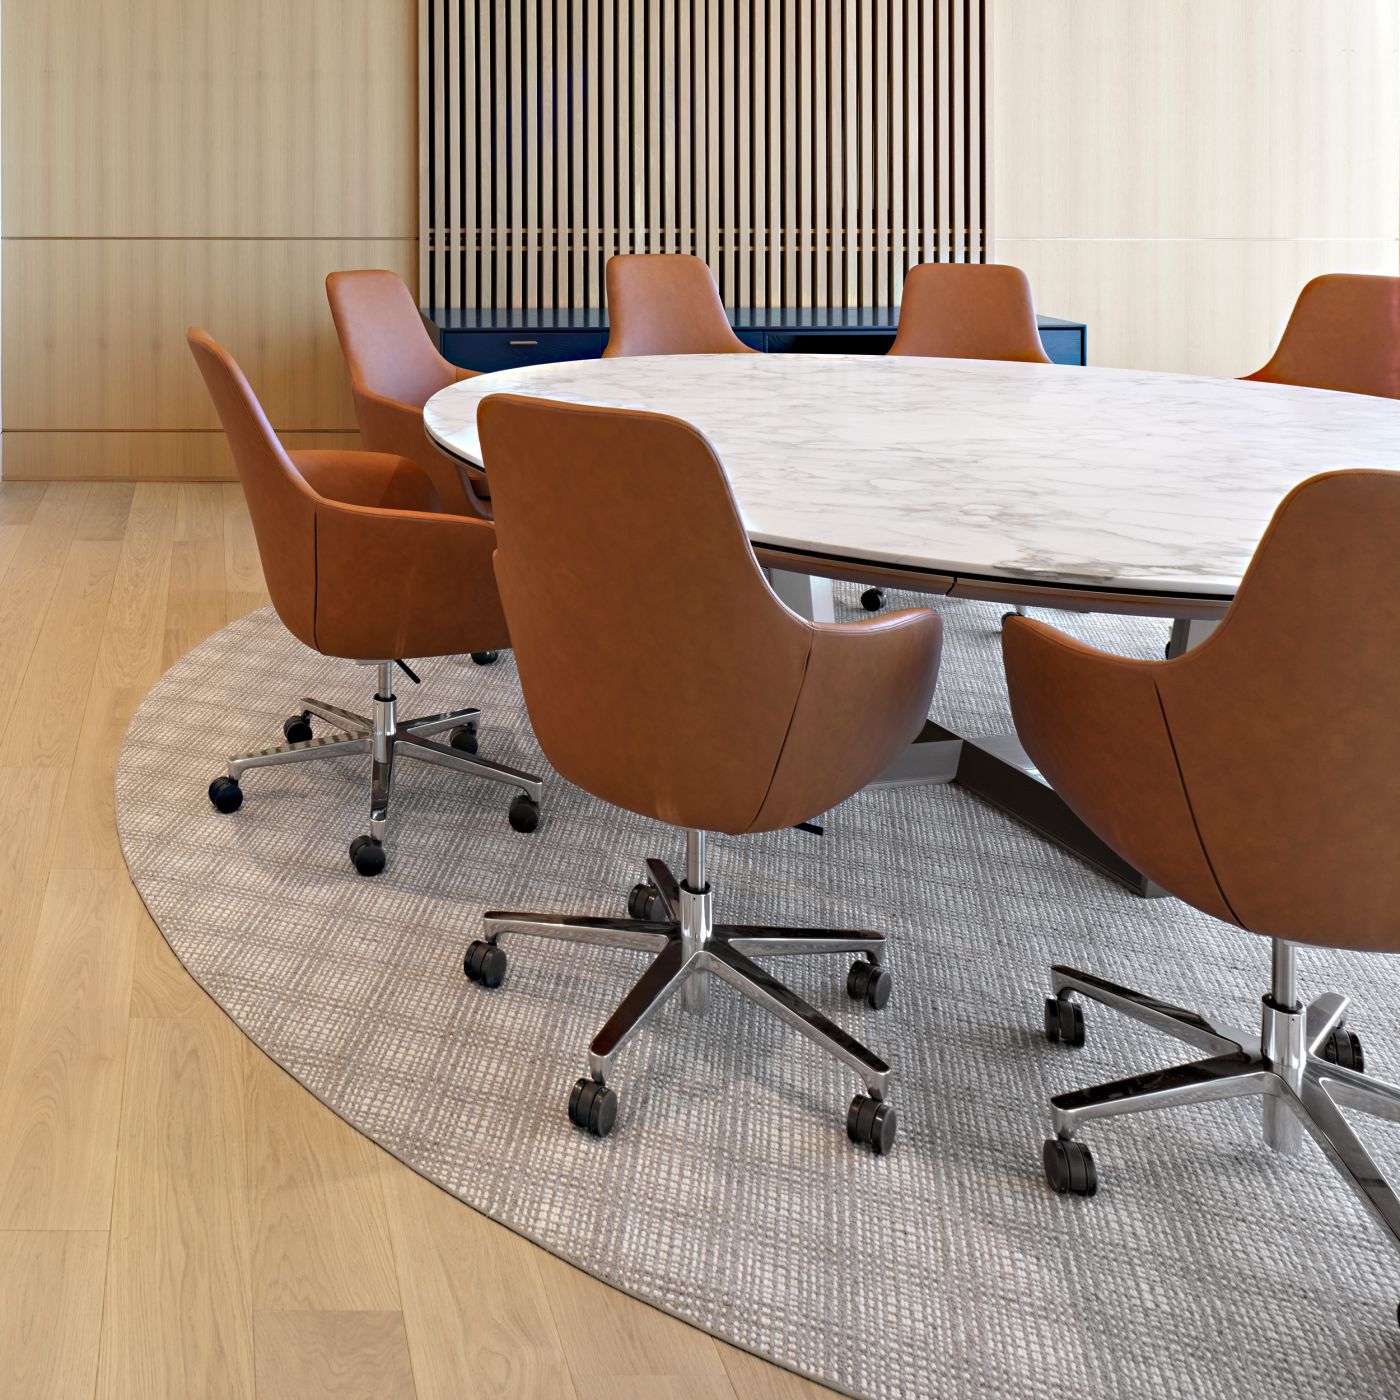 Round MESA table with stone surface and HALO sideboard complement the modern aesthetic of this conference room.